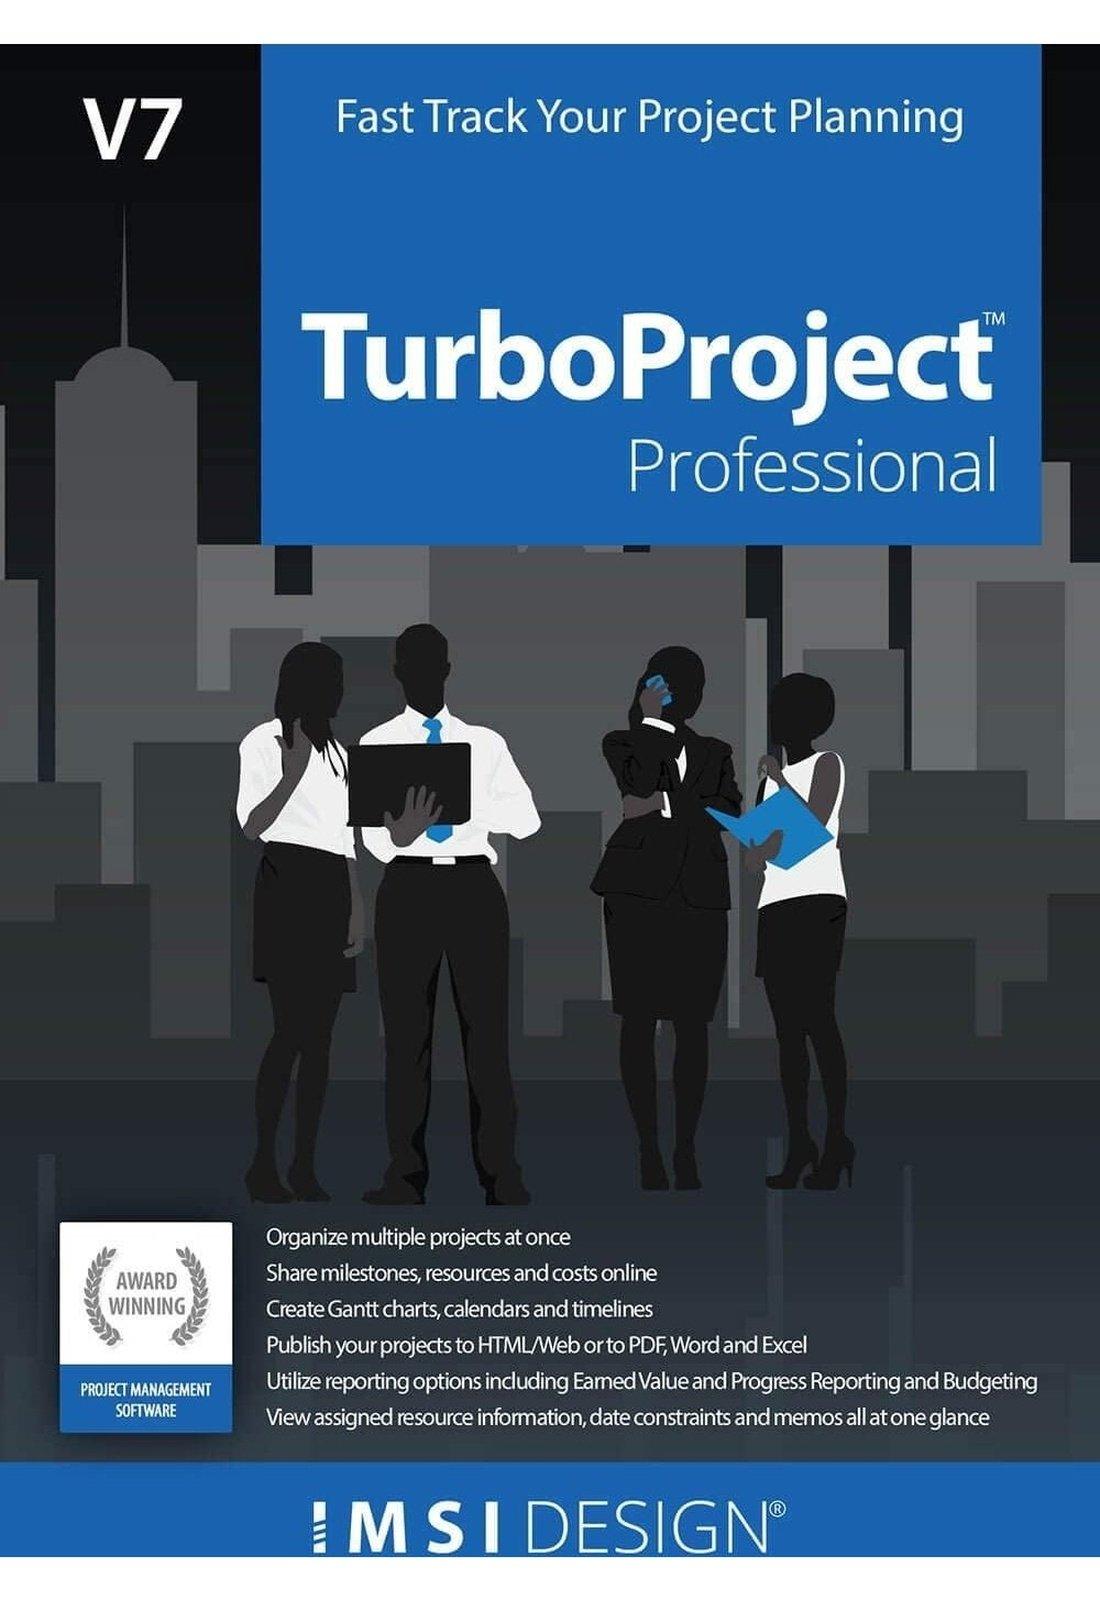 TurboProject Professional v7 - Instant Download for Windows (1 Computer) - SoftwareCW - Authorized Reseller